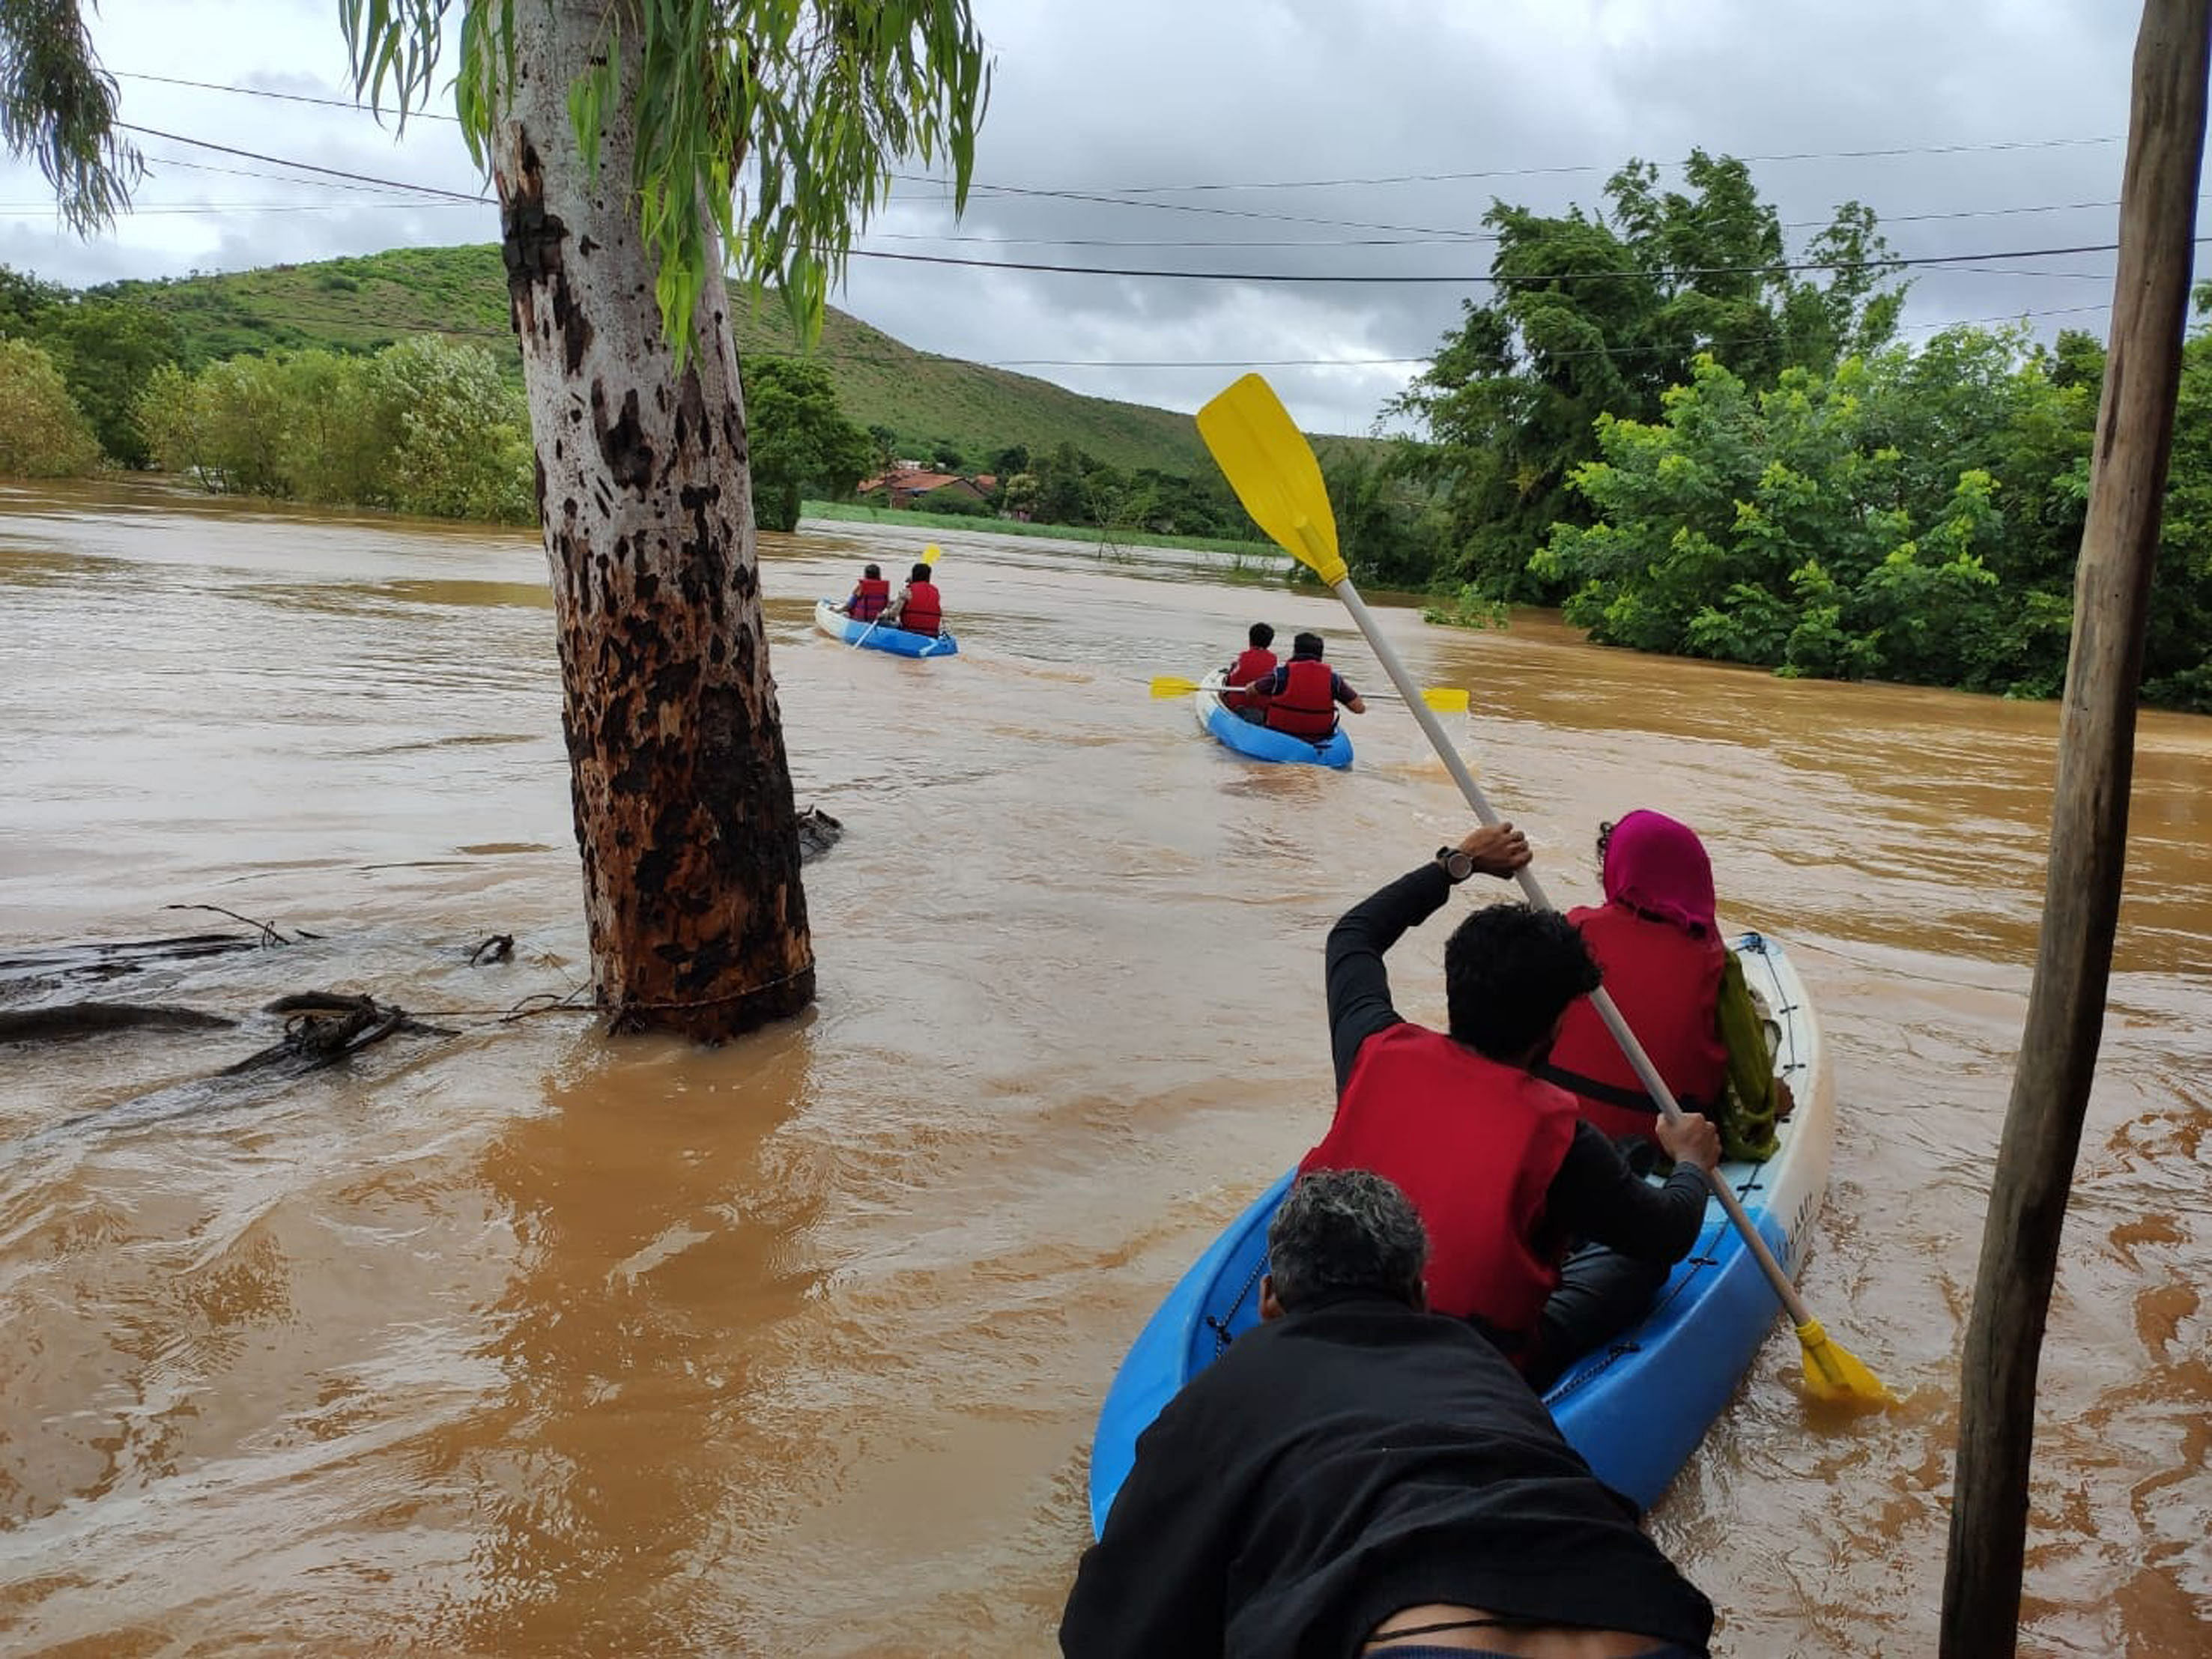 District administration declared two day holiday on August 6 and 7 to schools in both Belagavi and Chikkodi Education district excluding Ramadurg taluk in view of heavy rains lashing Belagavi district. (DH Photo)